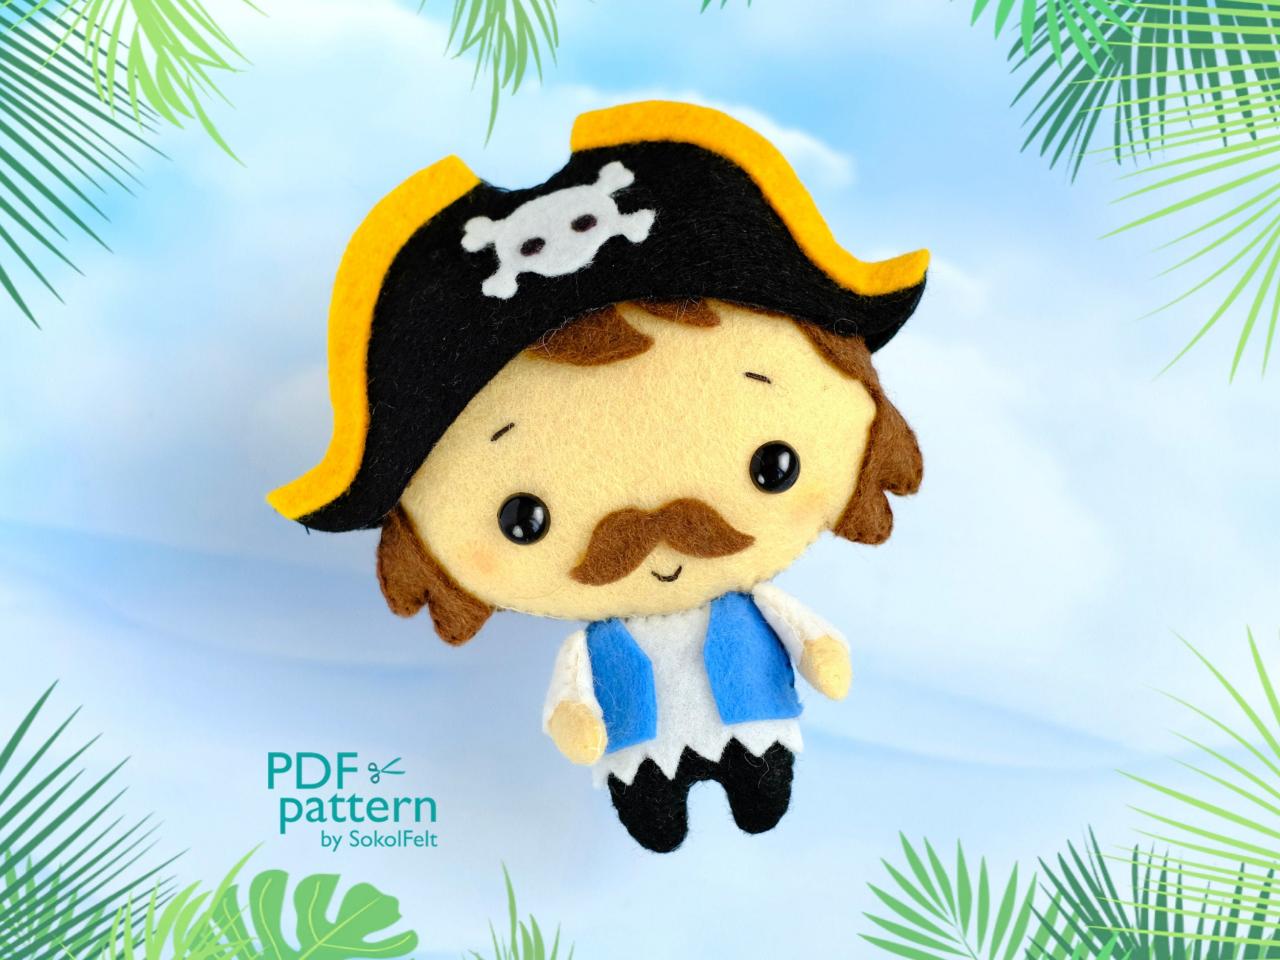 Pirate boy felt toy PDF and SVG patterns, Plush doll sewing PDF tutorial, baby crib mobile toy, Pirate banner